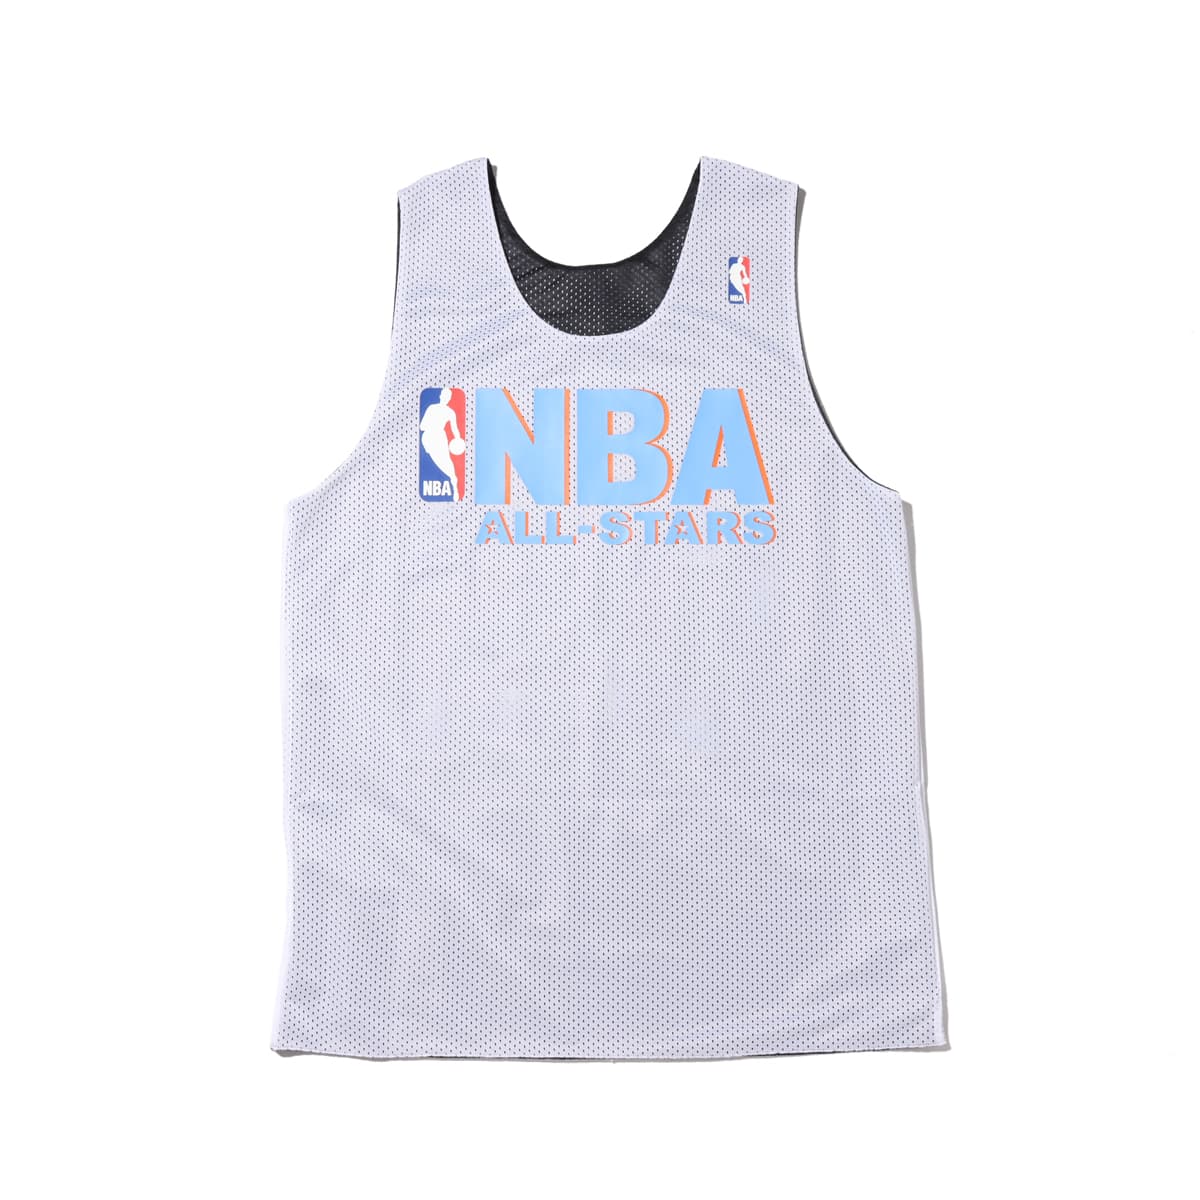 Mitchell & Ness NBA AUTHENTIC PRACTICE JERSEY ALL STAR 1997 